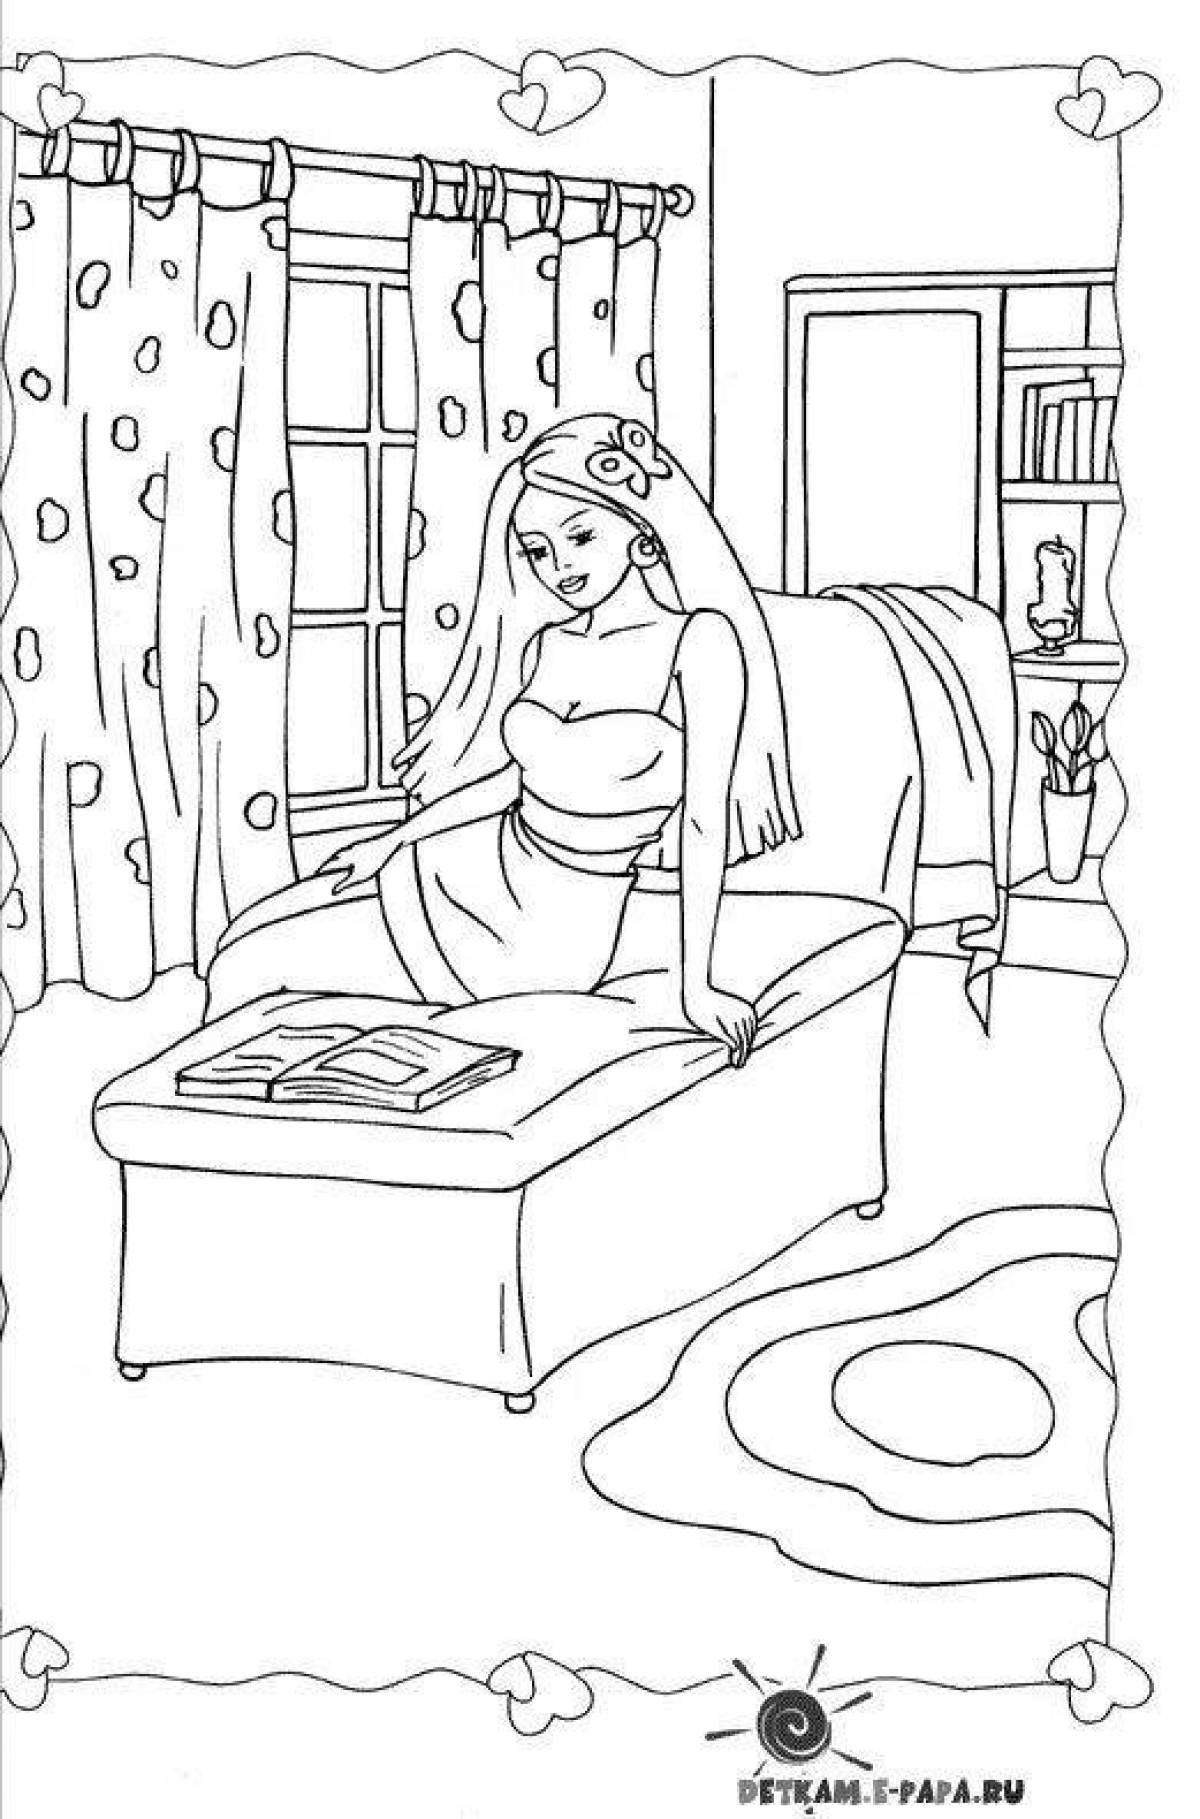 Coloring page adorable barbie house